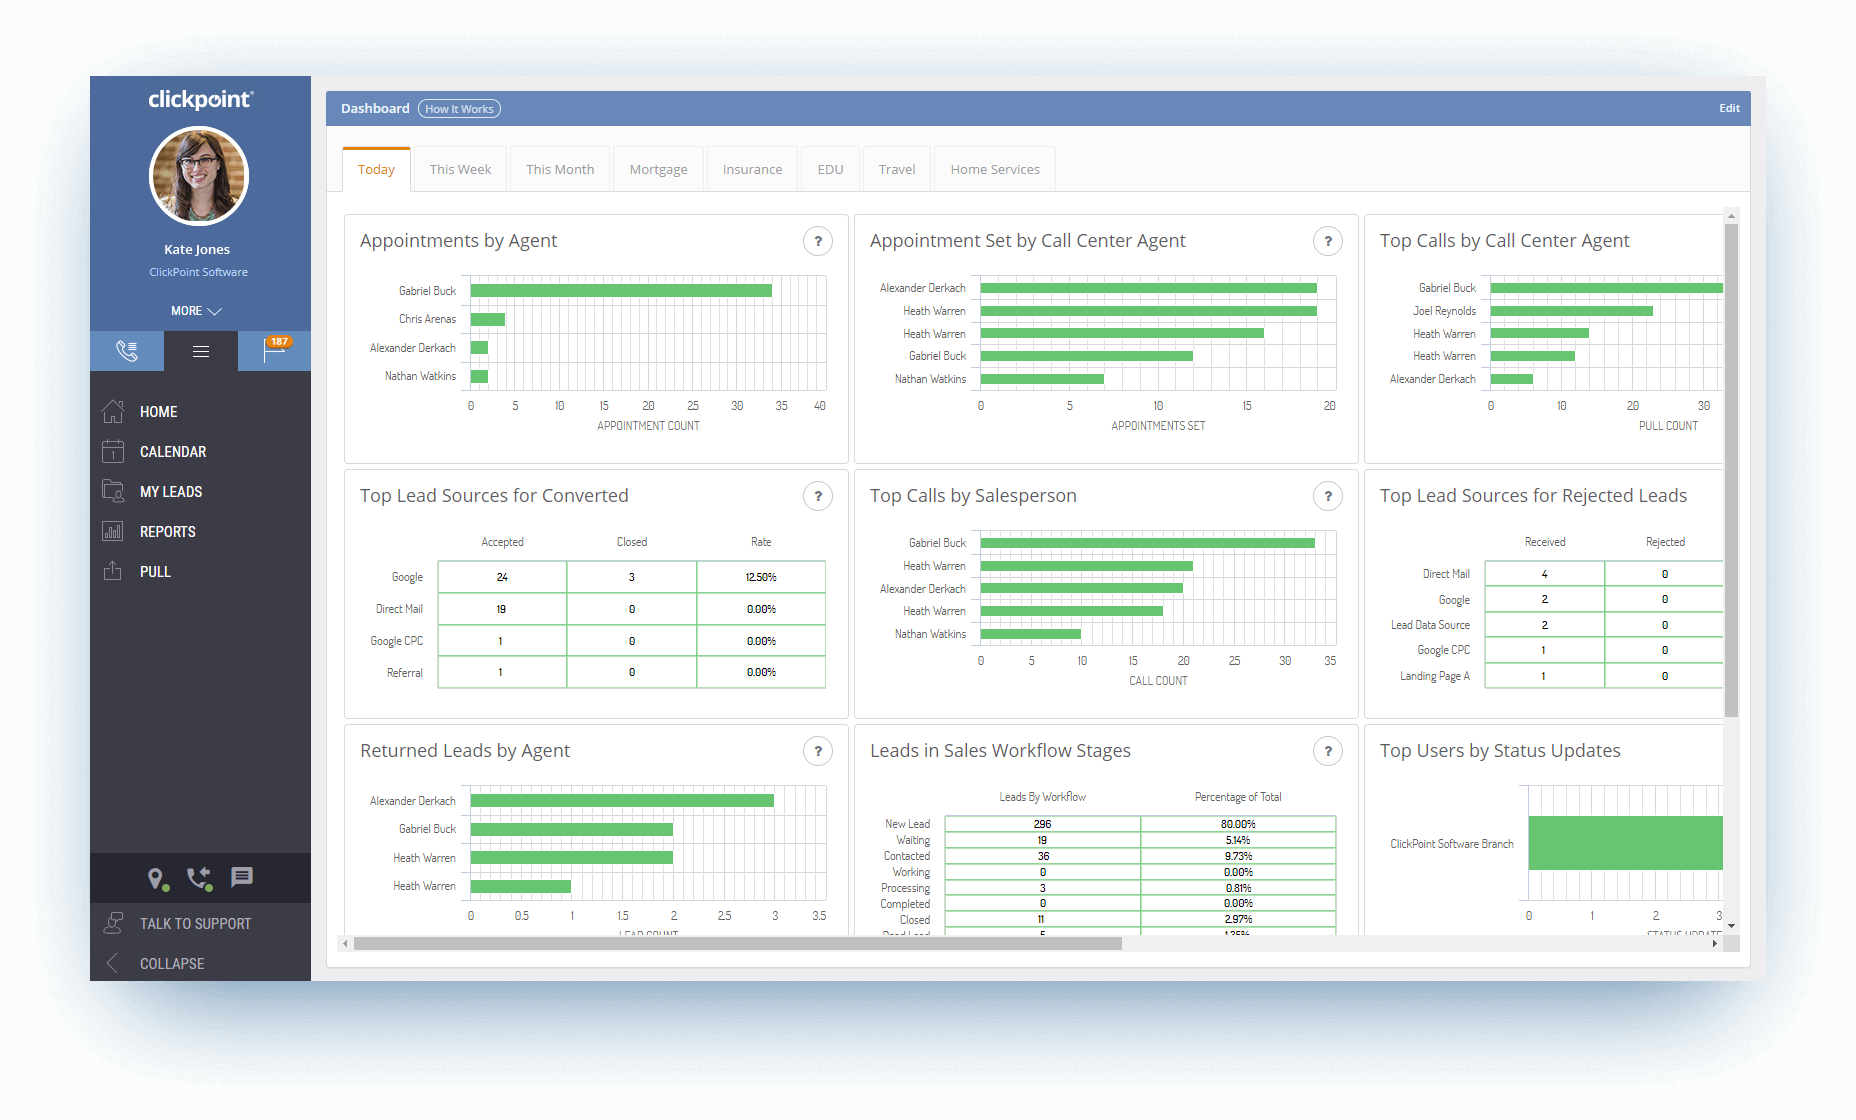 Marketing and Sales Performance Dashboard